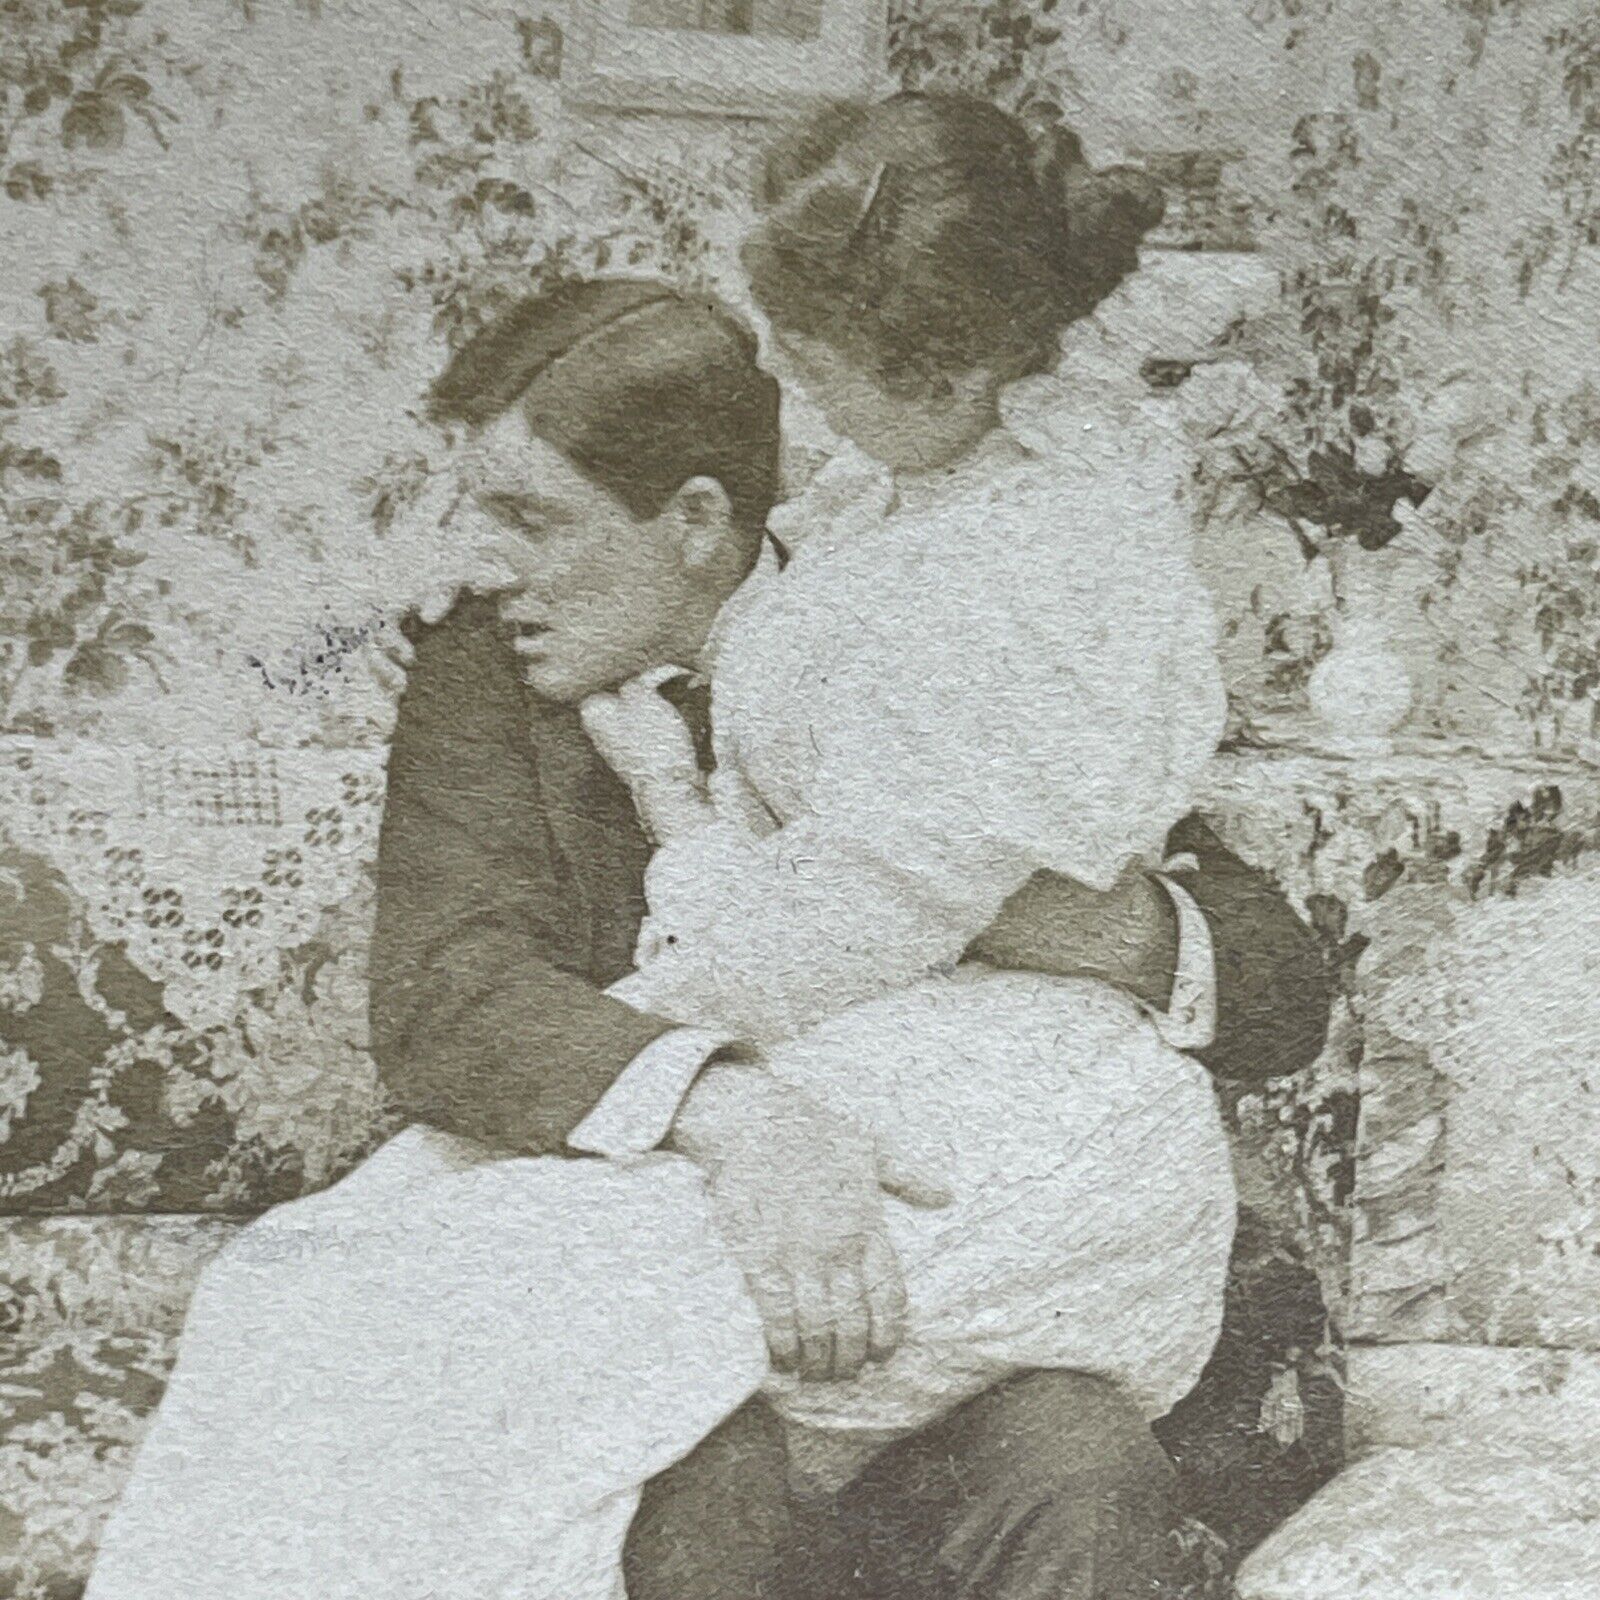 Antique 1897 Boy Catches Couple Kissing On Couch Stereoview Photo Card P1897